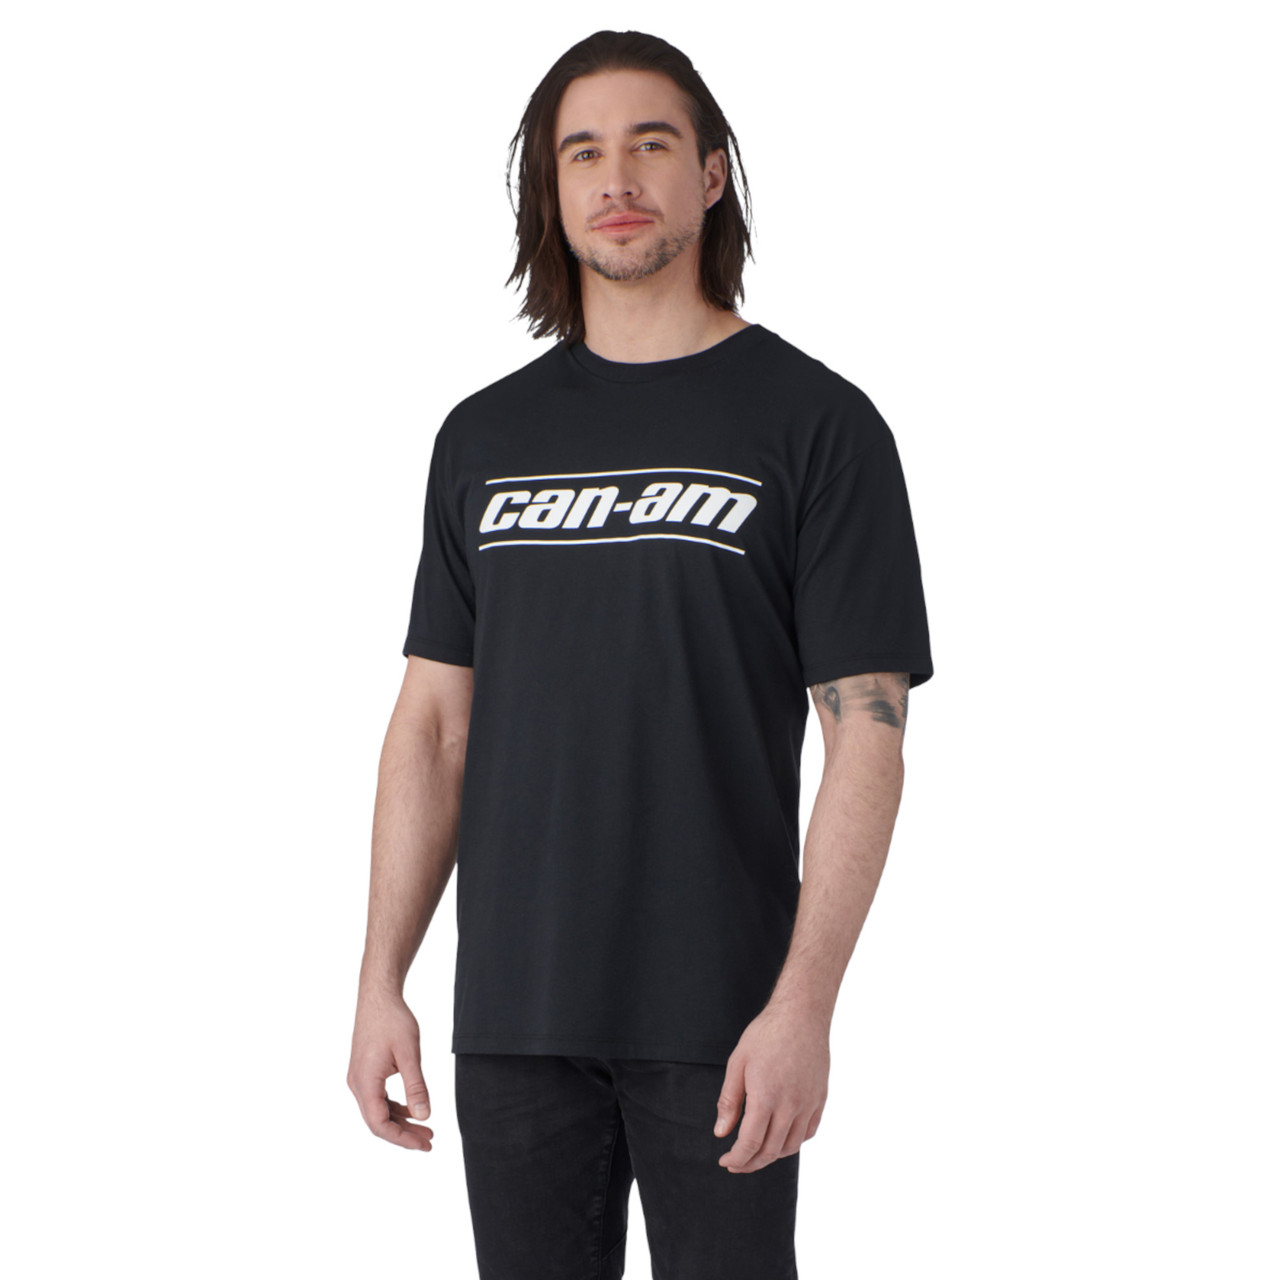 Can-Am New OEM, Men's 2XL Cotton Signature Branded T-Shirt, 4547541490